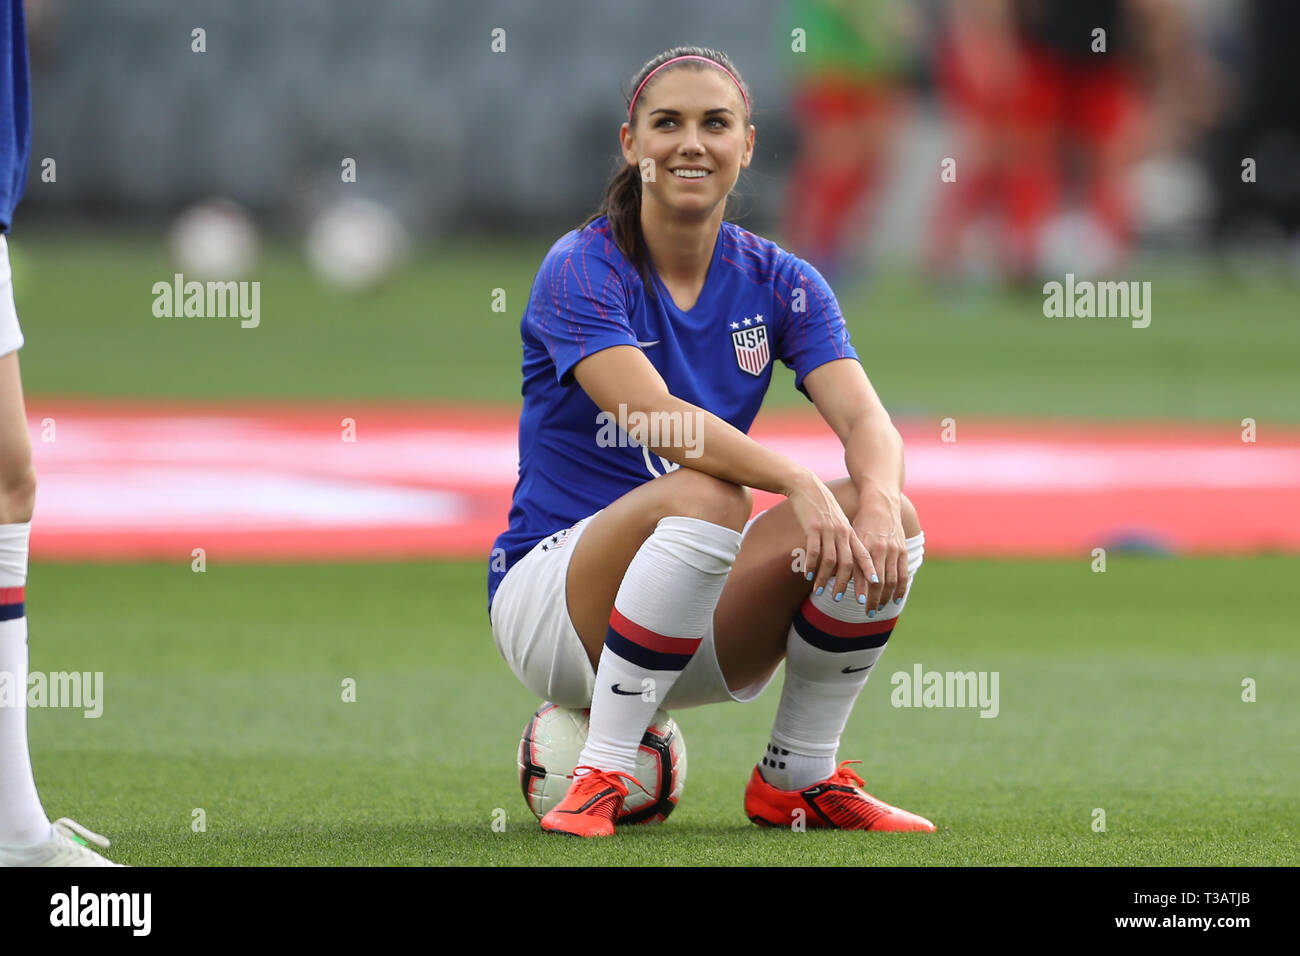 Los Angeles, CA, USA. 7th Apr, 2019. United States of America forward Alex Morgan (13) rests during pre-game warmups before the game between Belgium and USA at Banc of California Stadium in Los Angeles, CA. USA. (Photo by Peter Joneleit) Credit: csm/Alamy Live News Stock Photo